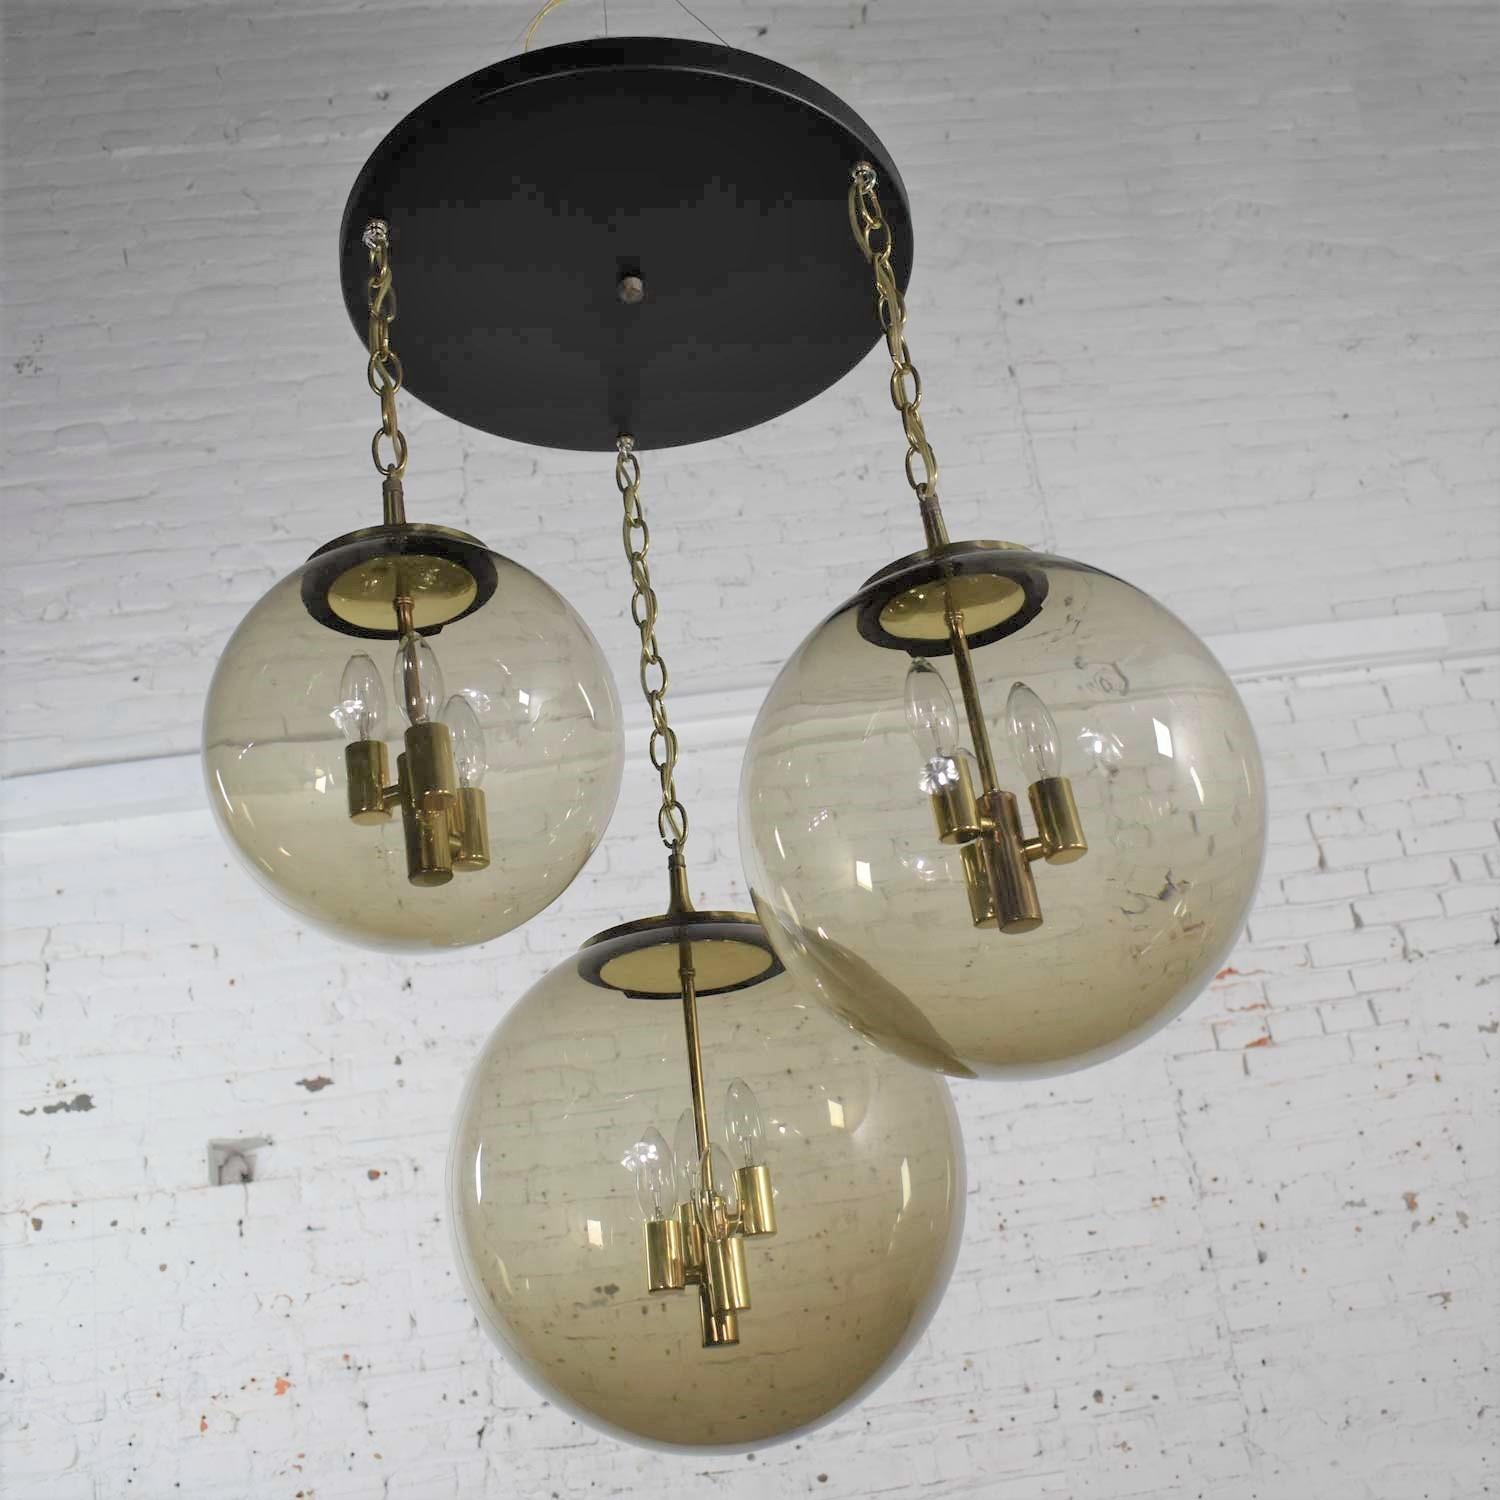 Mid-Century Modern Lightcraft of California Chandelier with 3 Cascading Smoke Glass Orb Globes For Sale